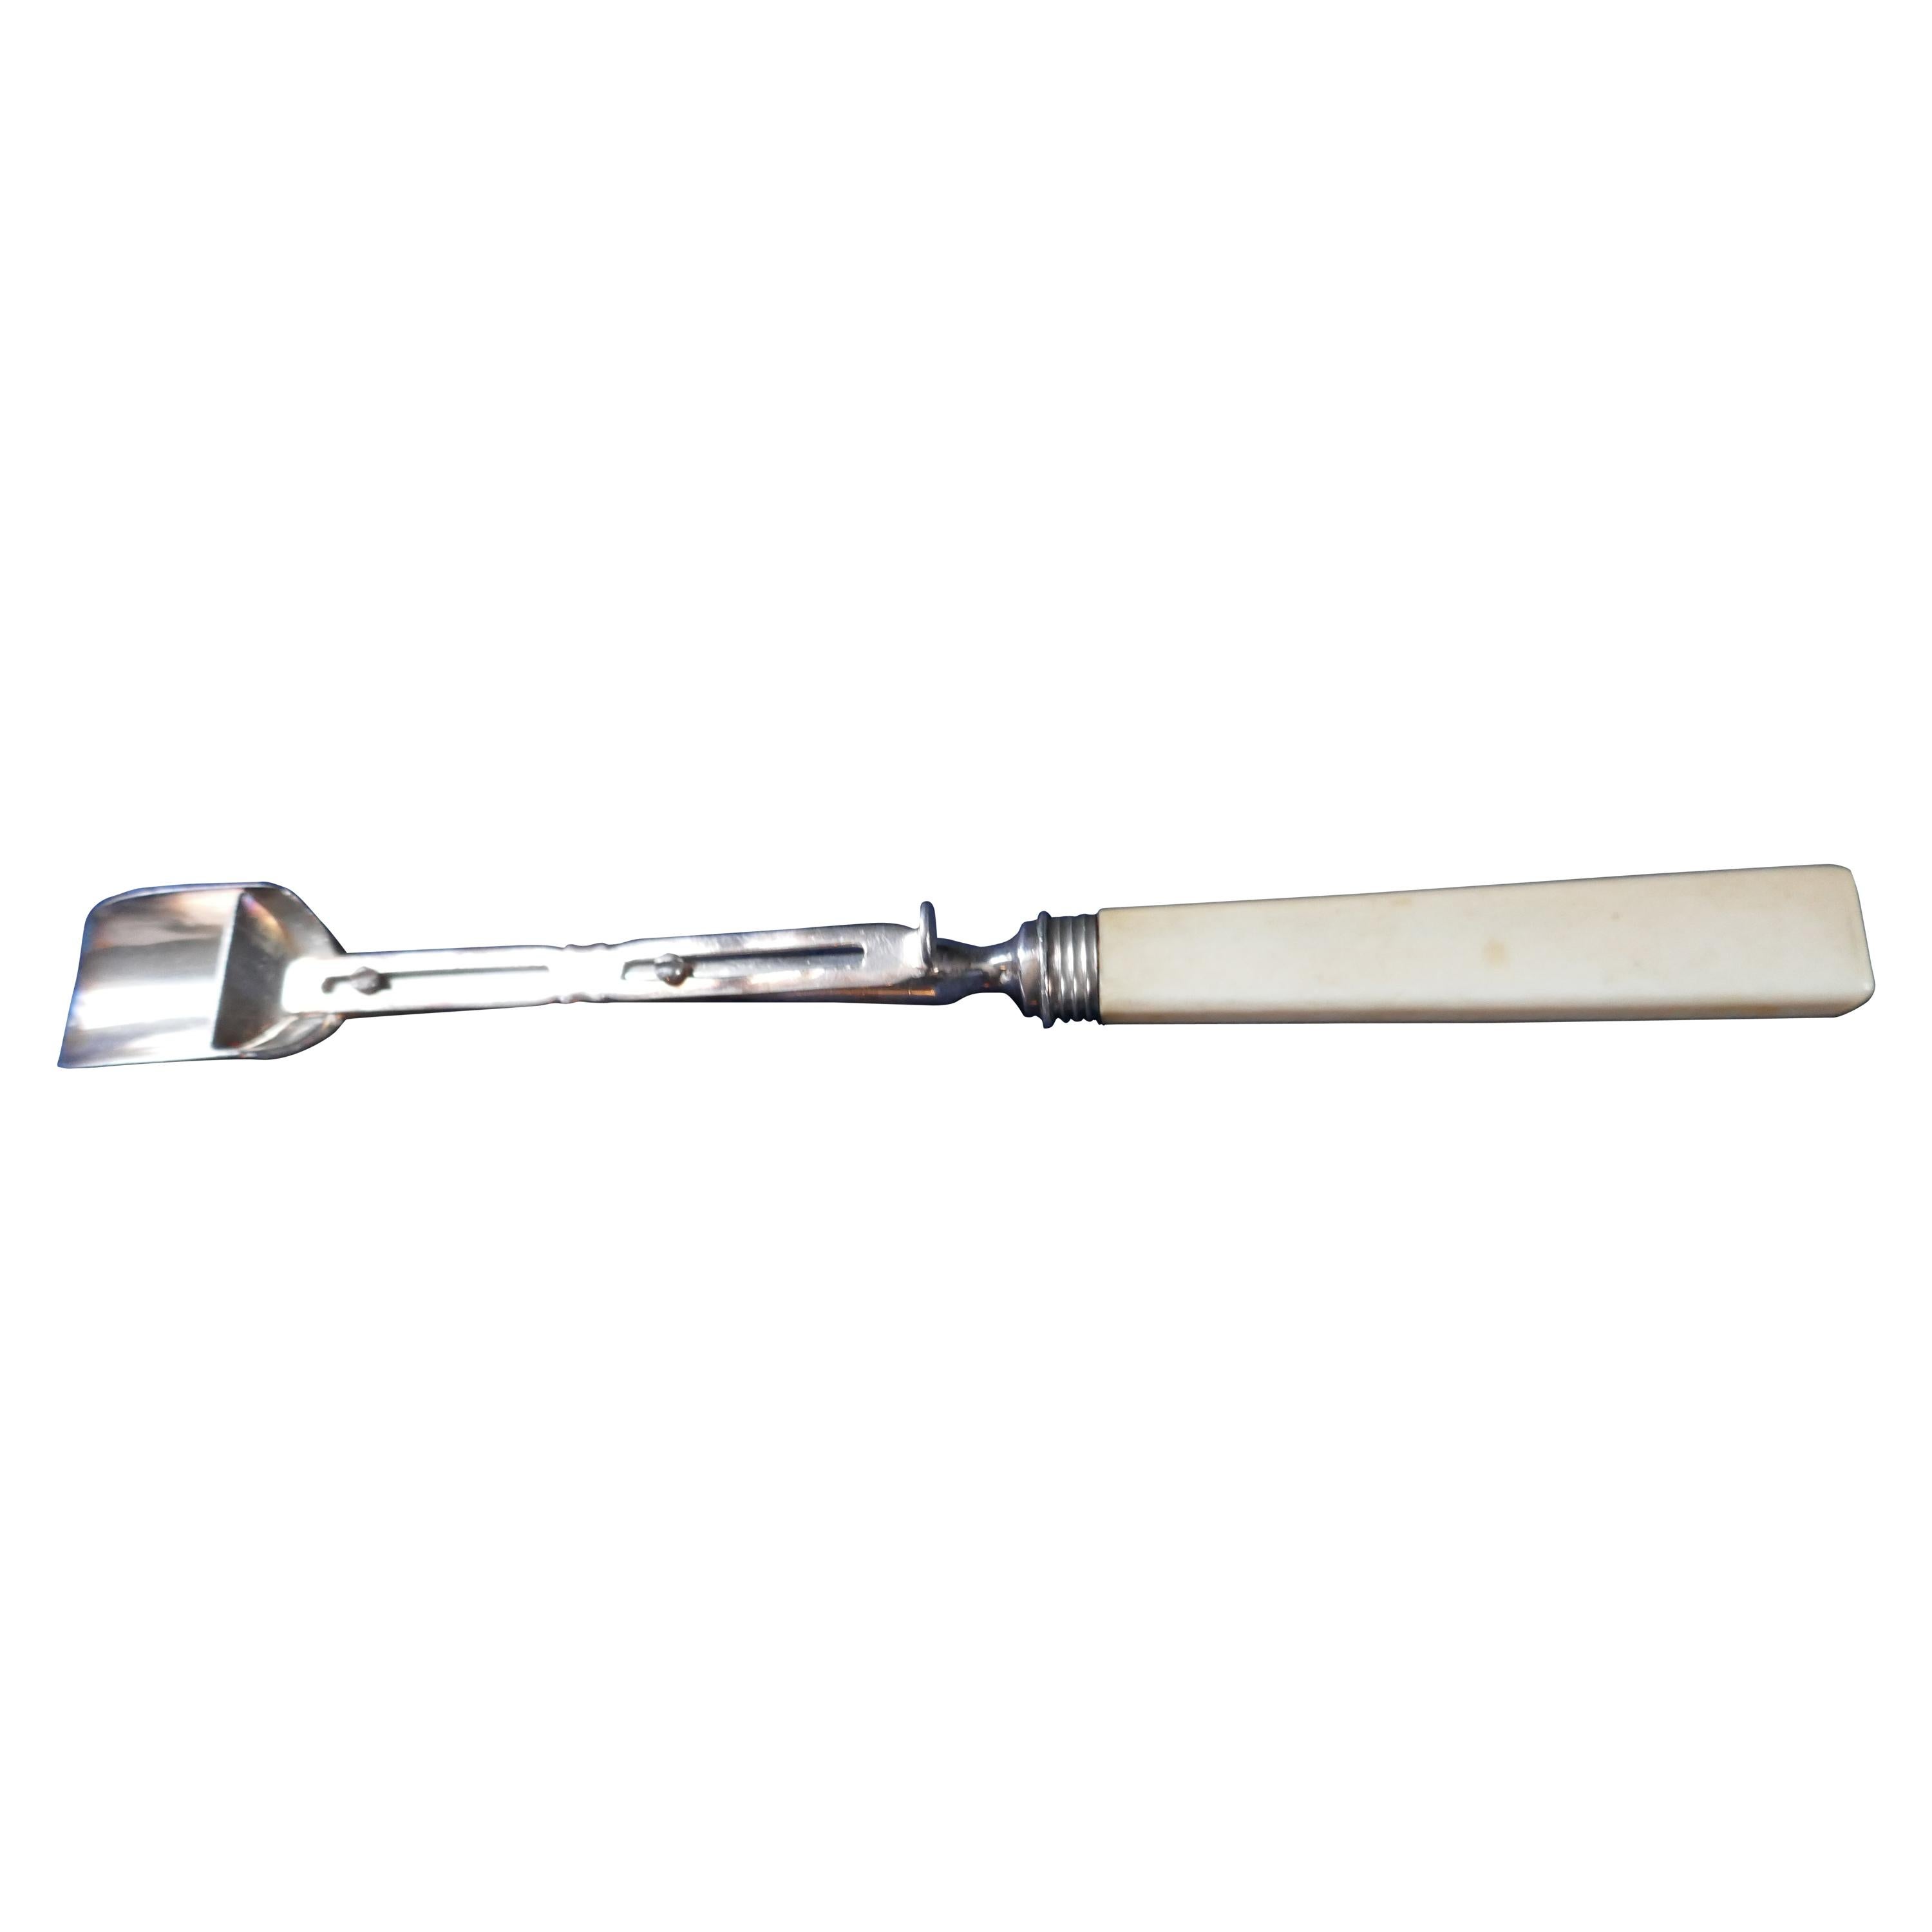 Silver Plated Mechanical Stilton Cheese Scoop made by Brad Food